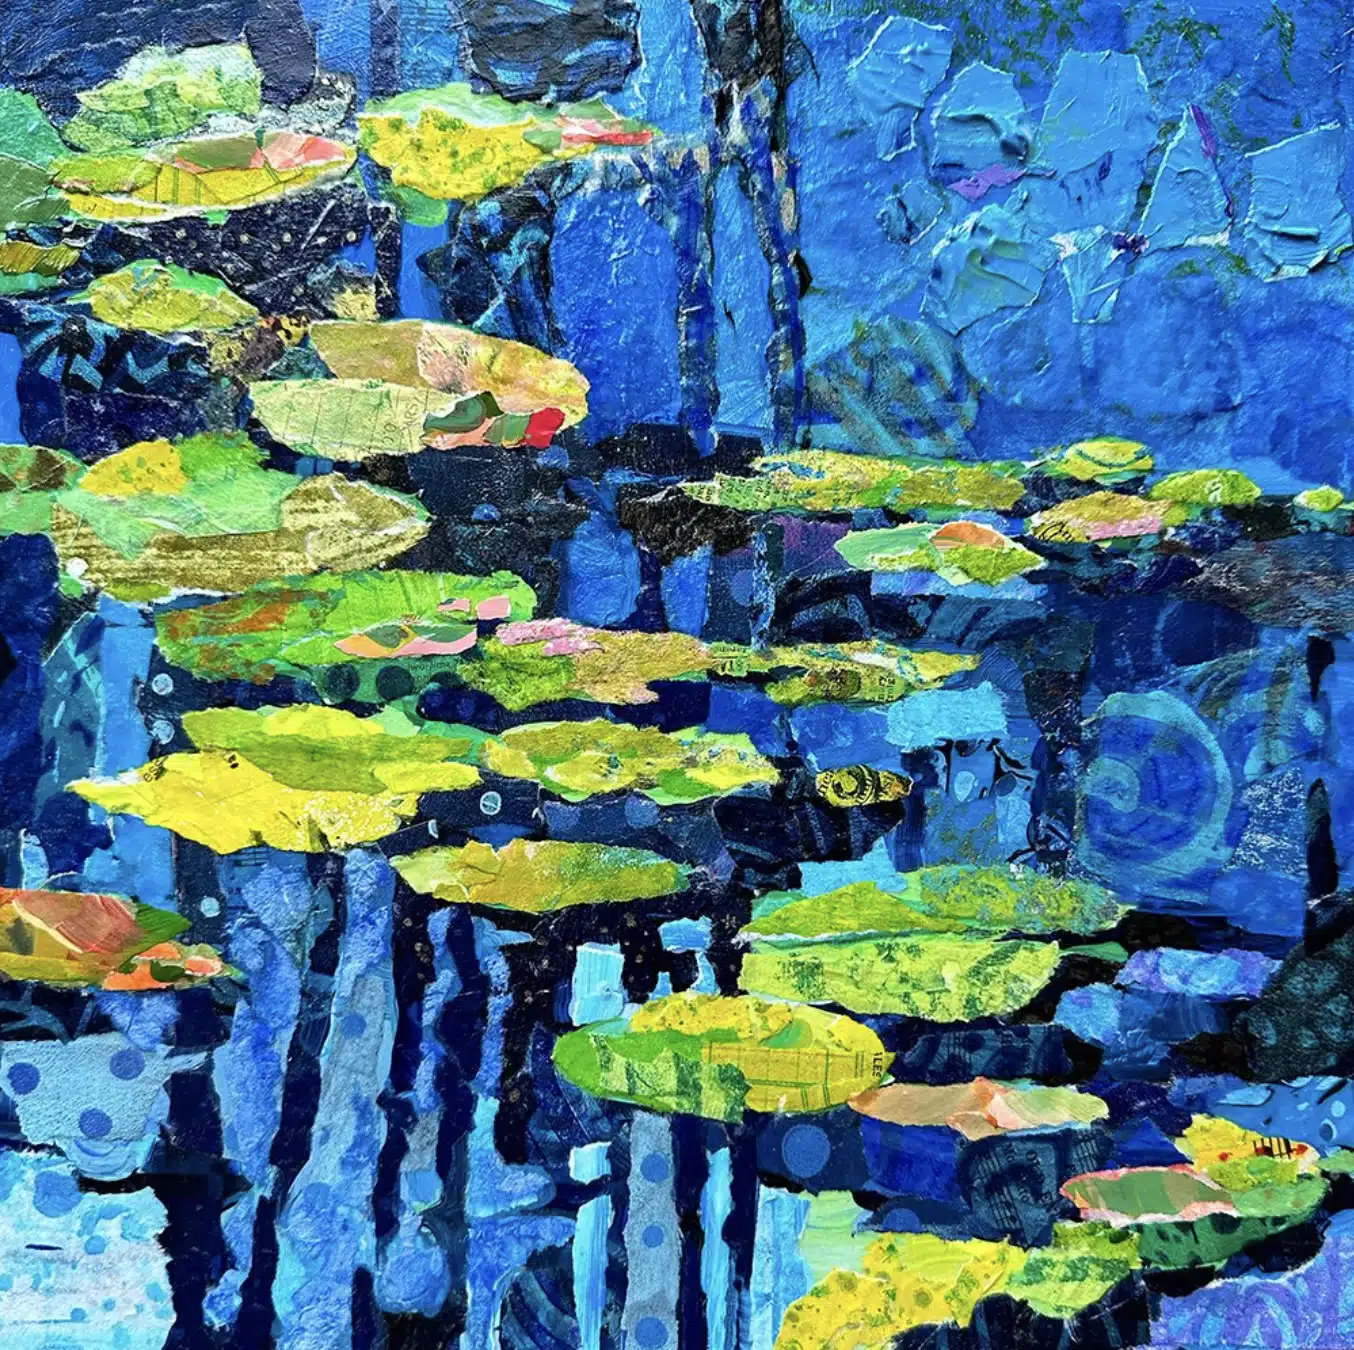 “Lily Pad Pond” by Elizabeth St. Hilaire